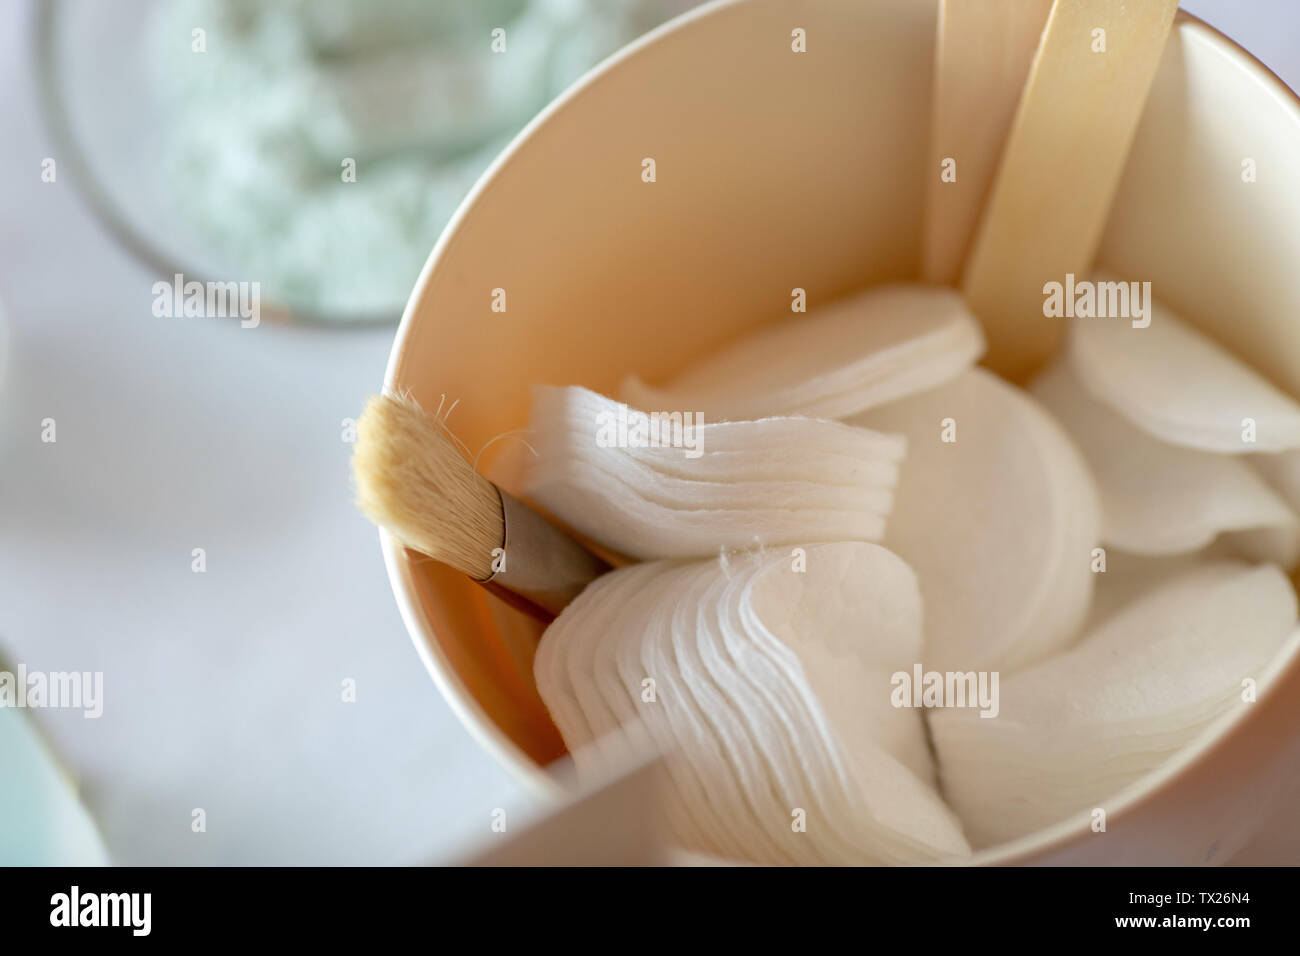 Cotton pads for face in plastic bowl Stock Photo